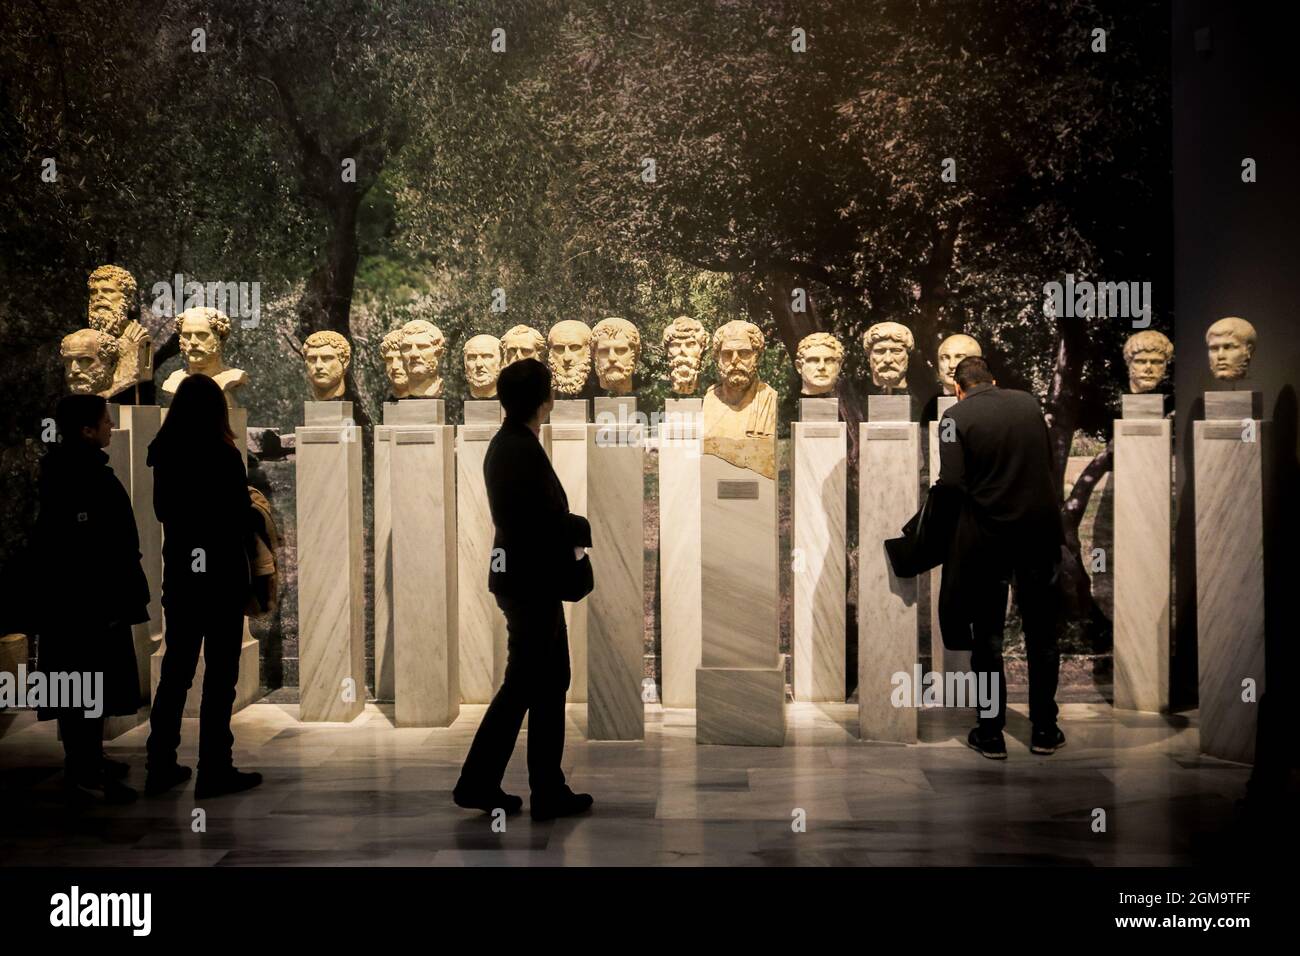 01-04-2018 Athens Greece - Shadowy people walking past heads of Greek philosophers on pedestals with garden background Stock Photo